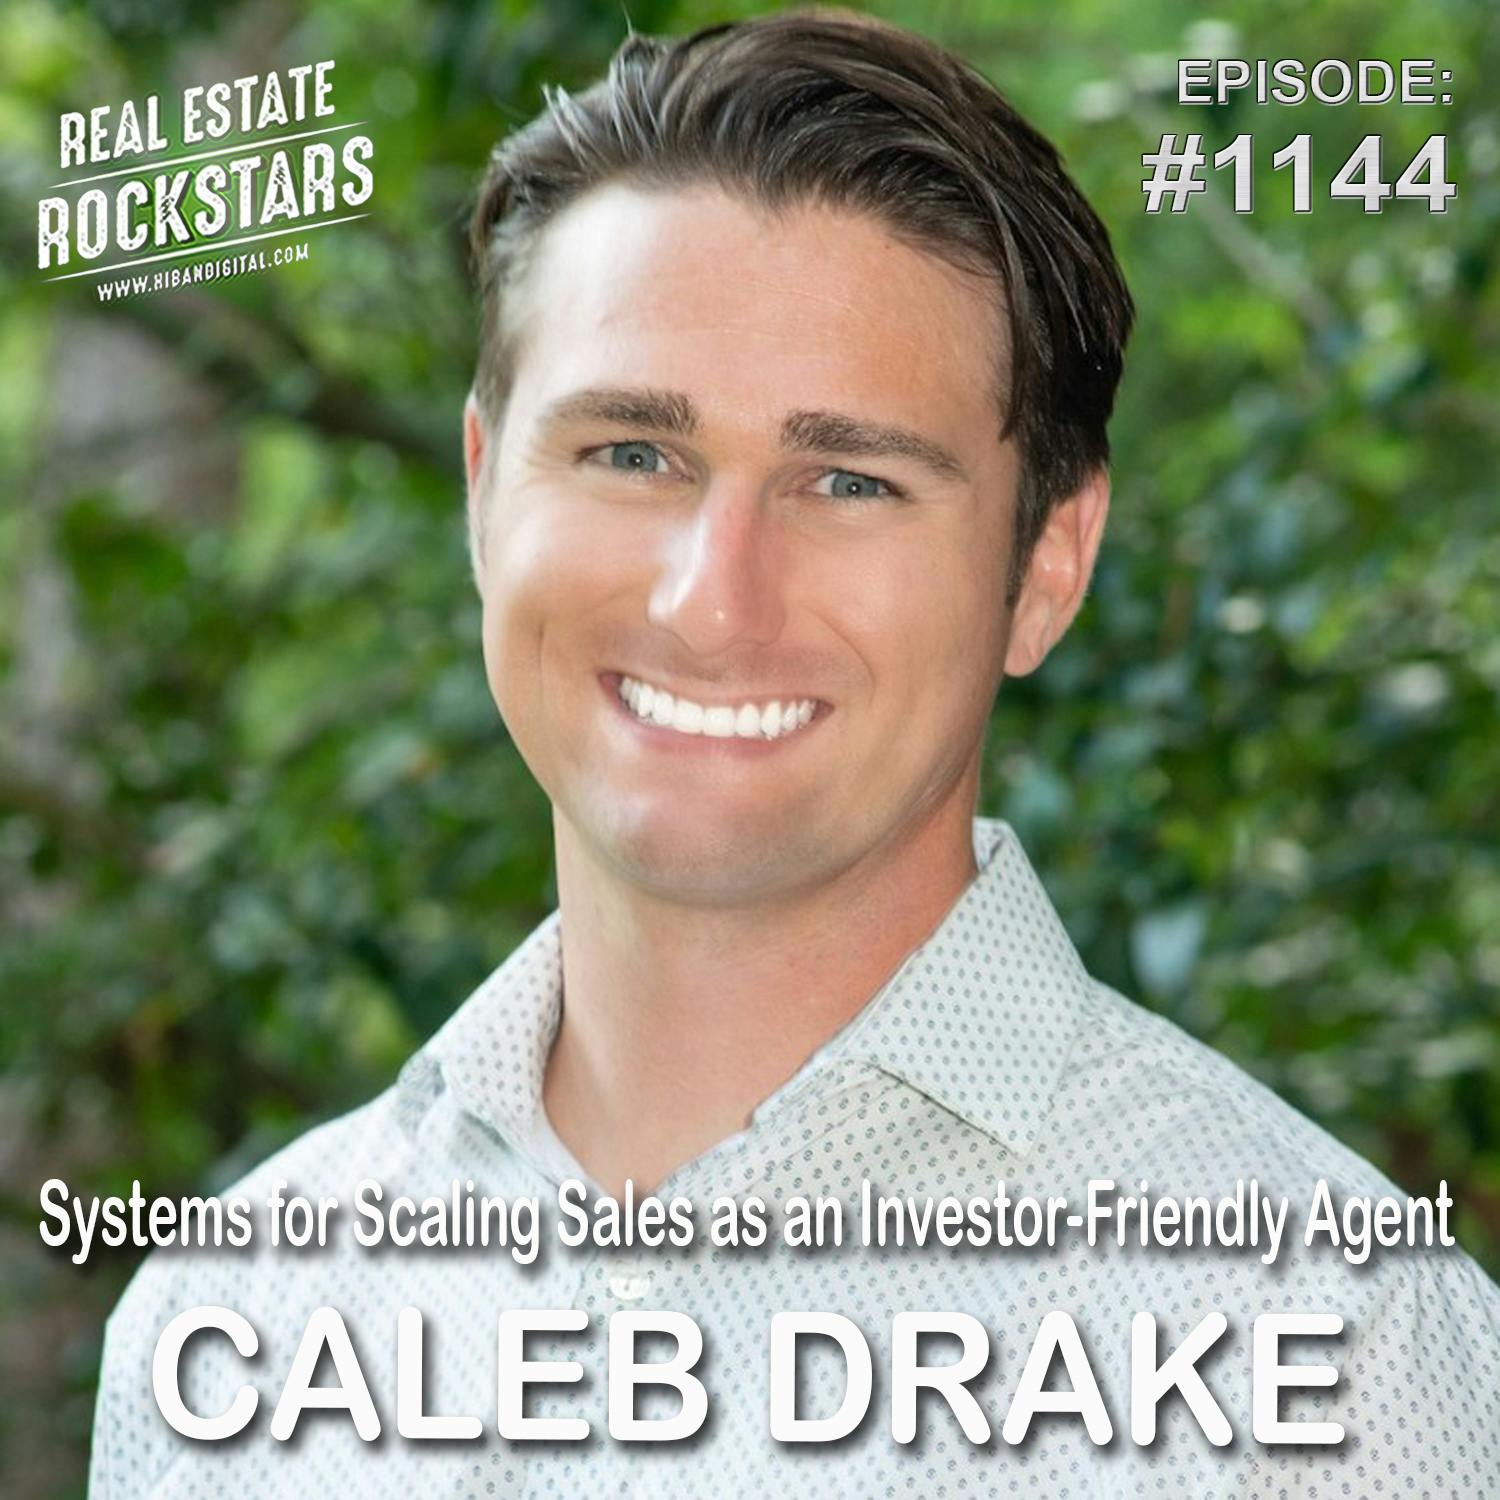 1144: Systems for Scaling Sales as an Investor-Friendly Agent - Caleb Drake